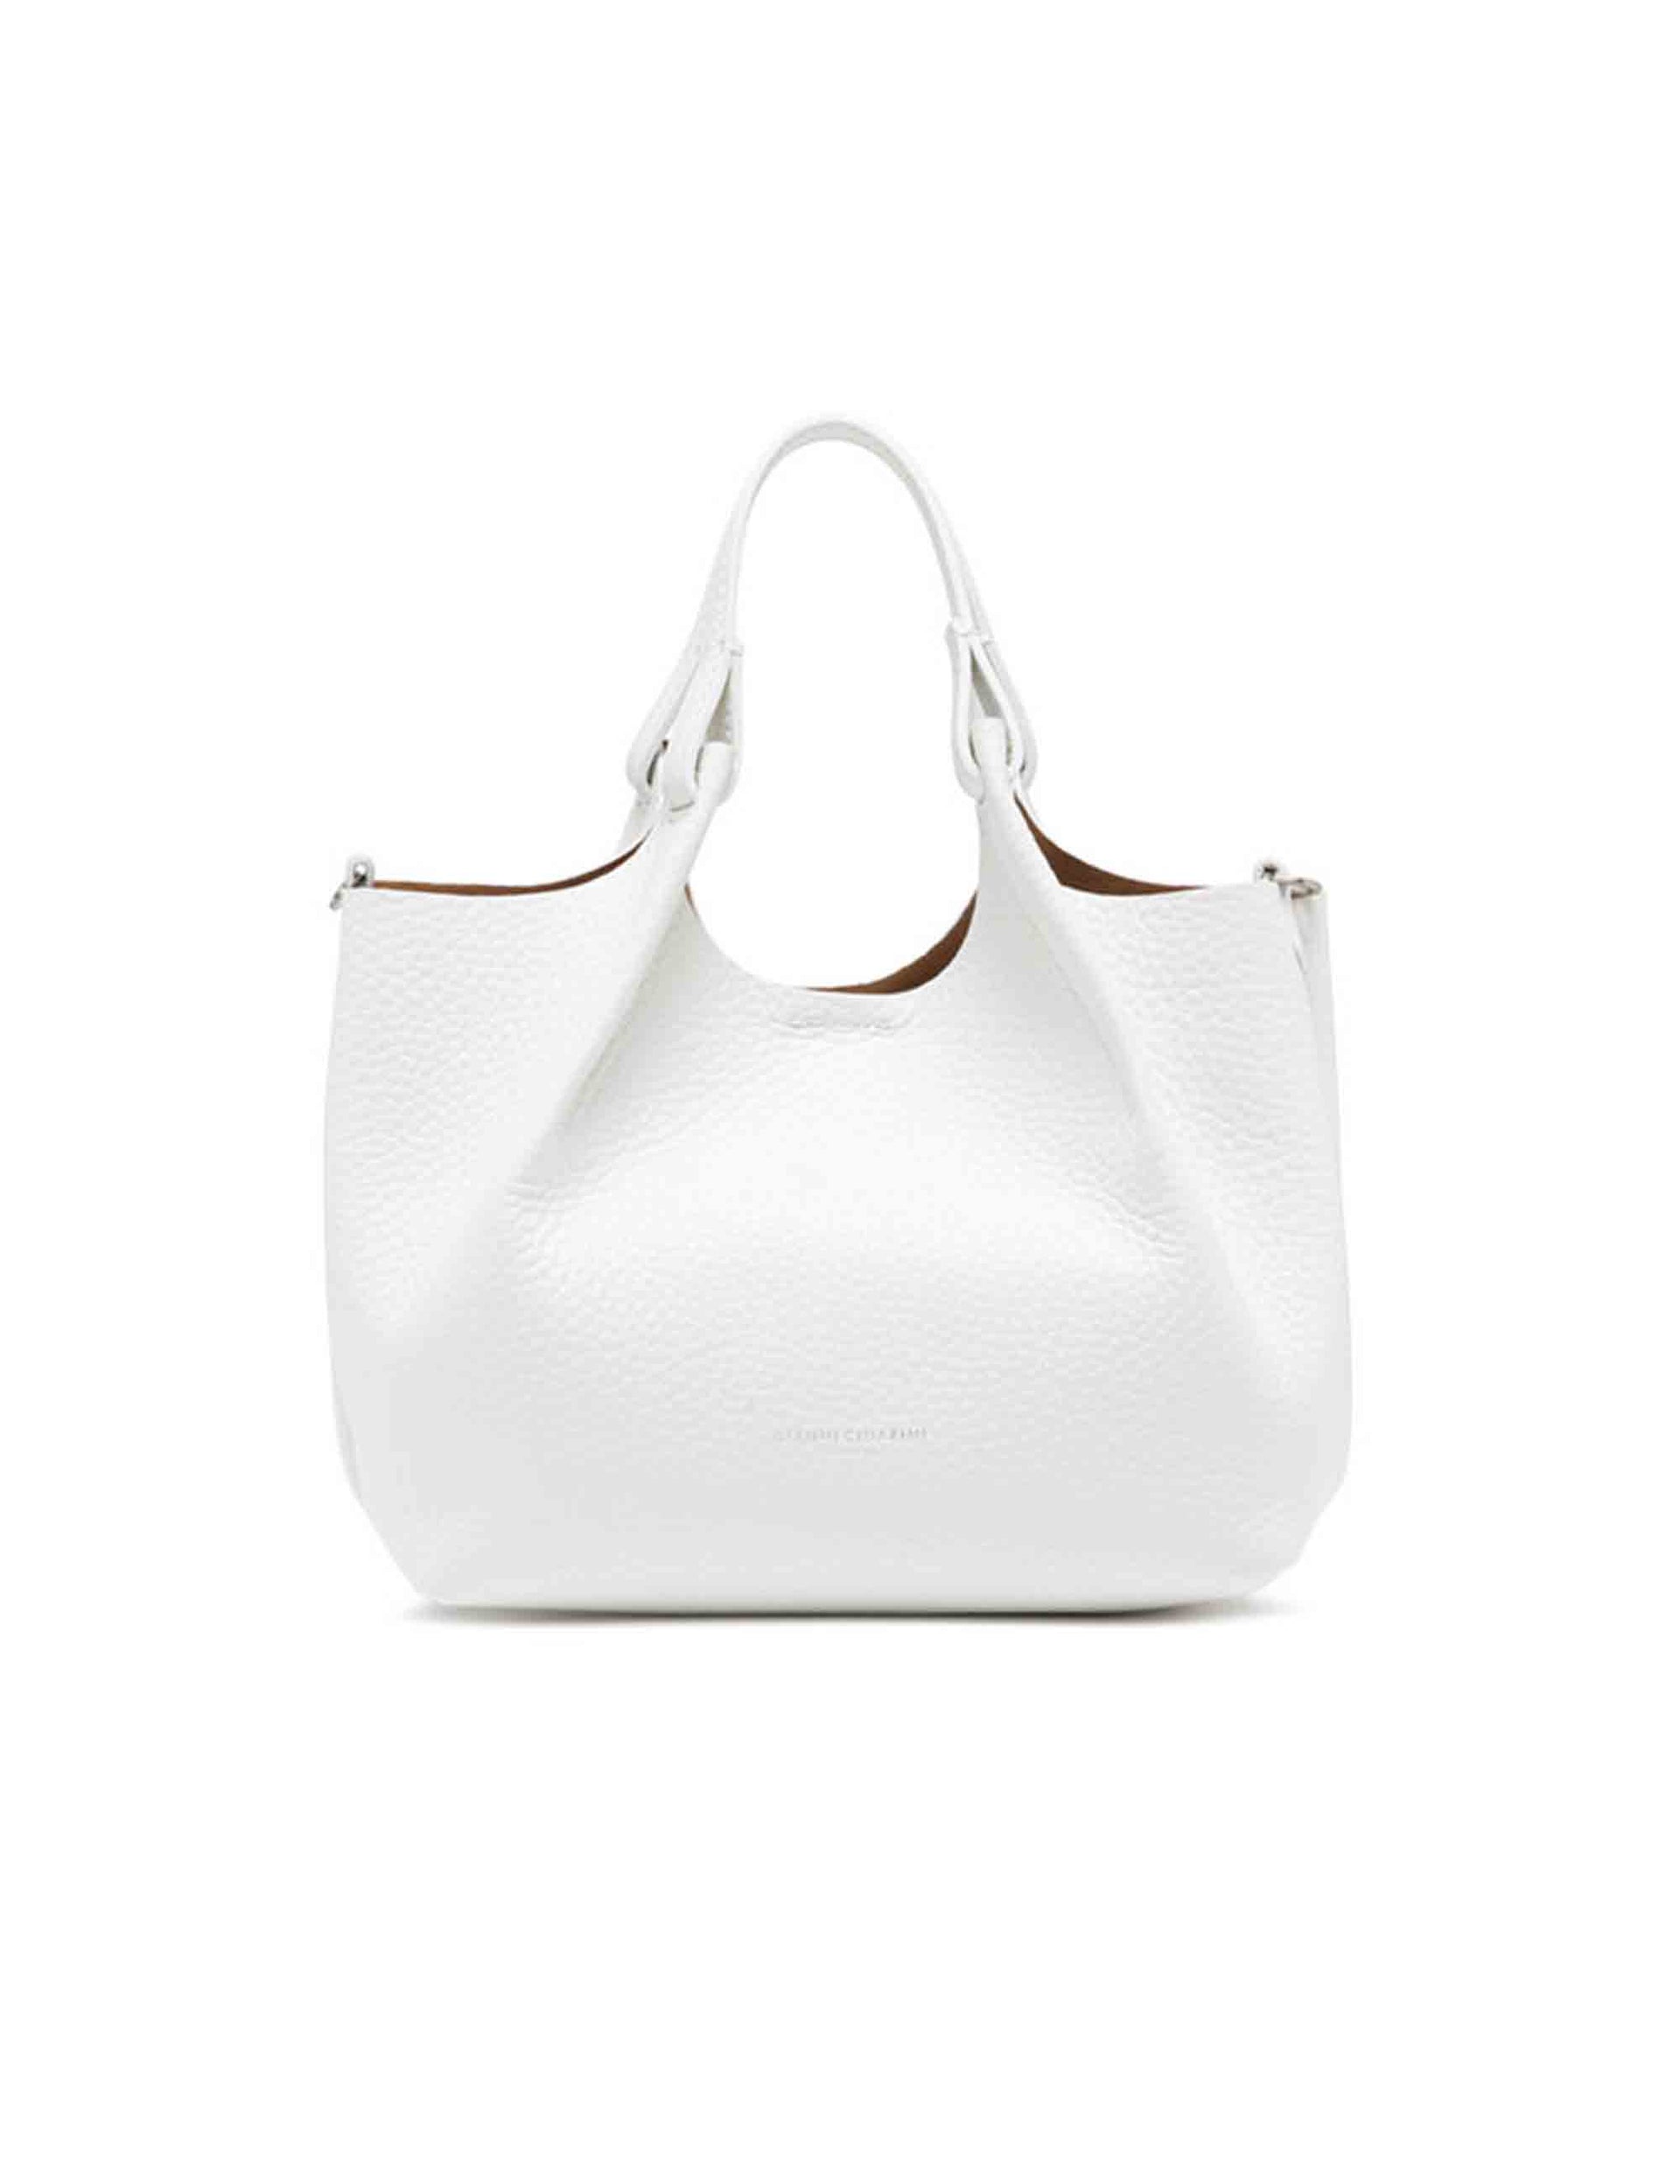 Dua women's shoulder bag in white leather with matching shoulder strap